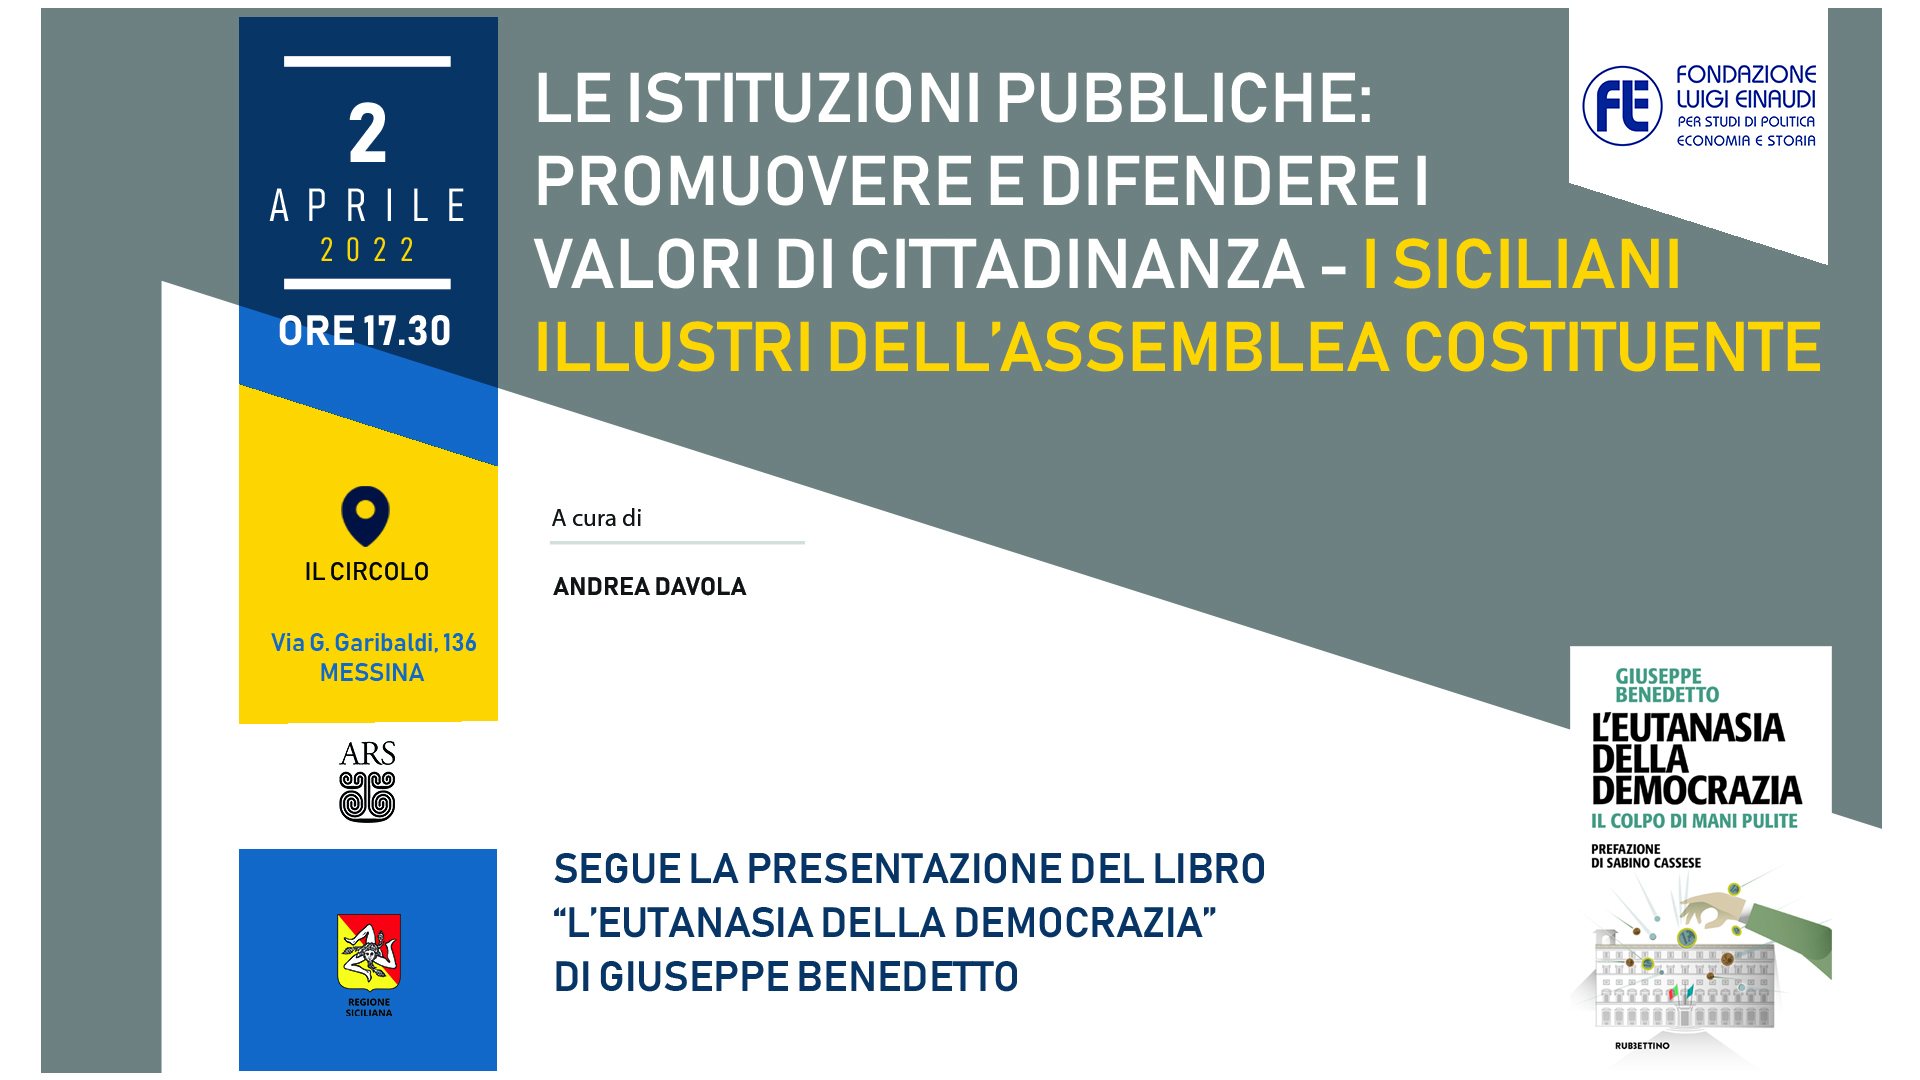 Public Institutions: Promoting and Defending Values of Citizenship